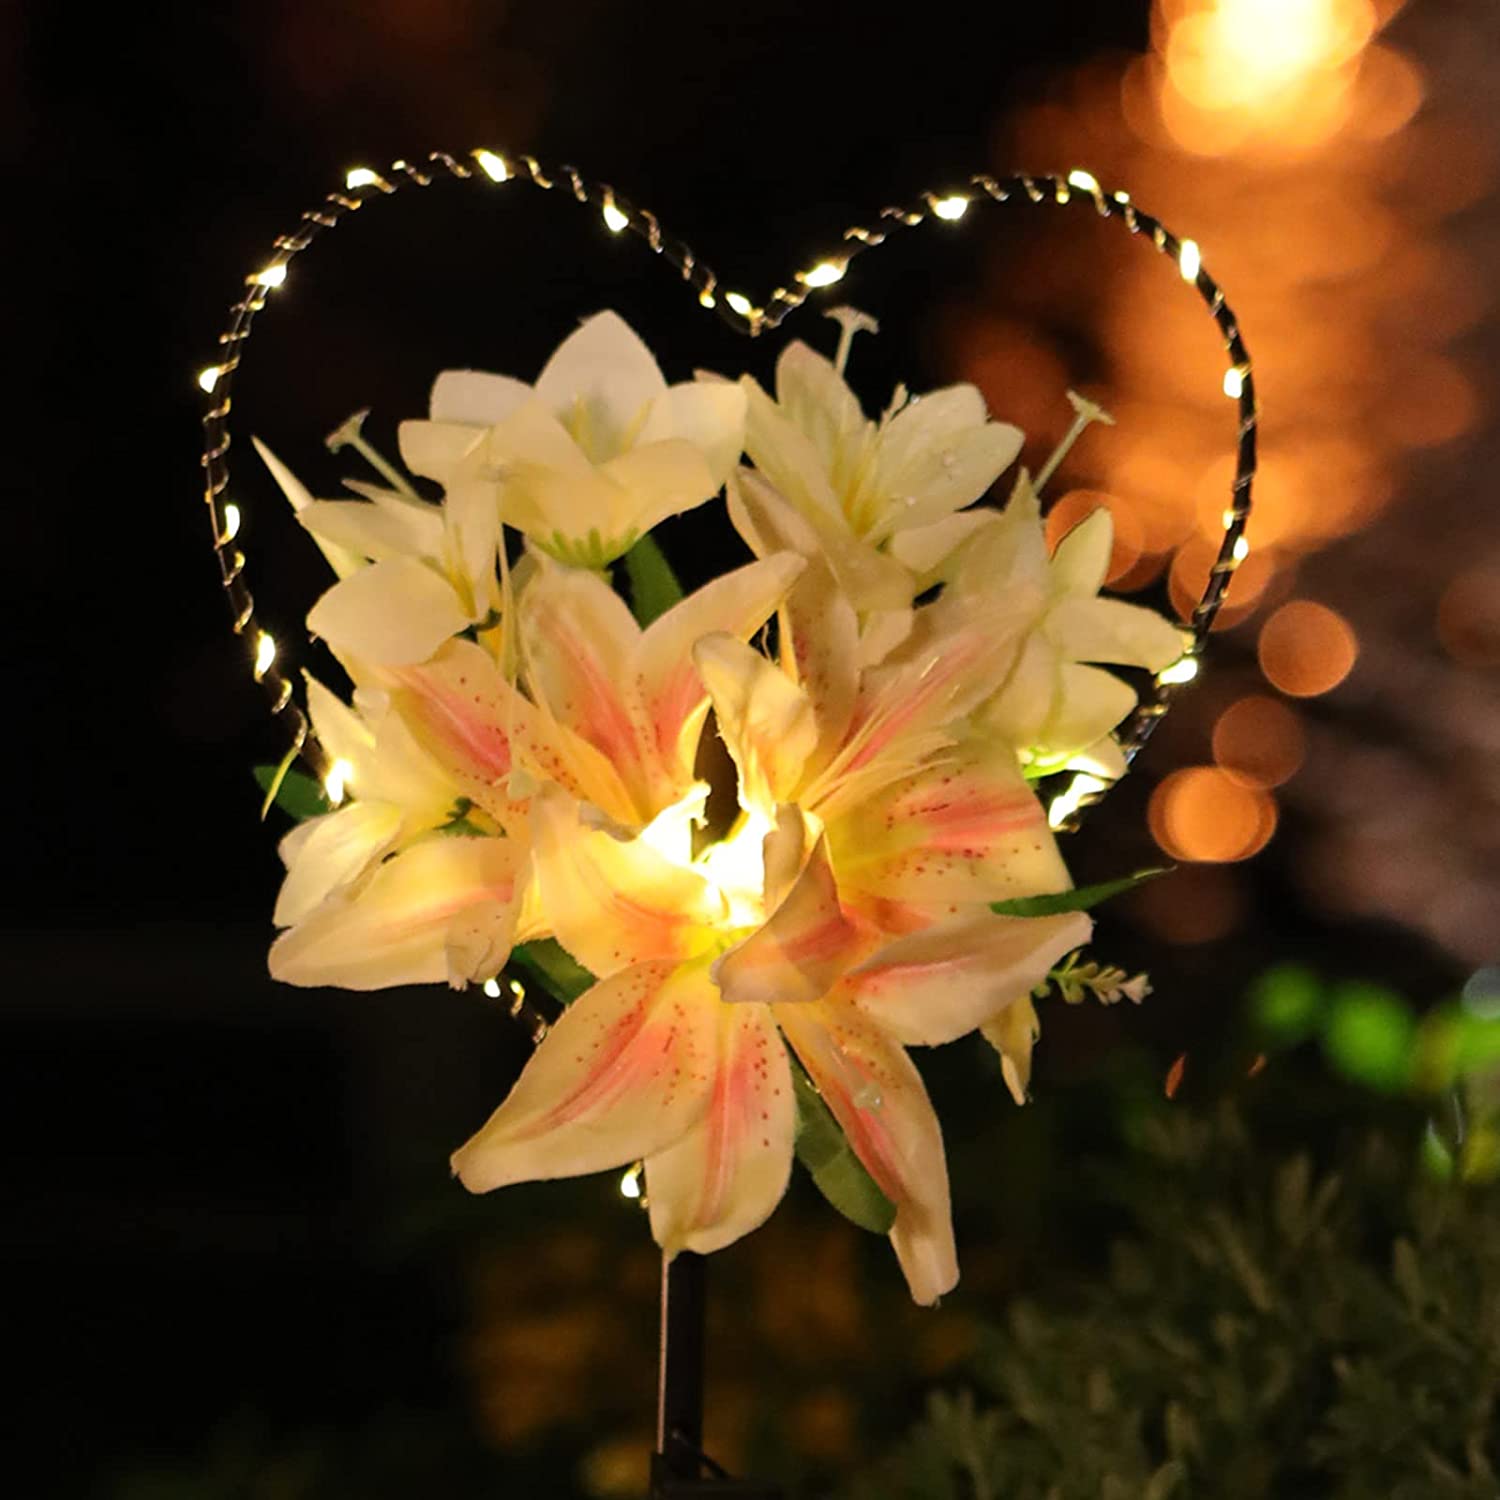 Starryfill Garden Solar Lights Outdoor Heart-Shaped with White Lily Flowers,Solar Stake Lights Outdoor with 25led Warm White Decorative for Remembrance Gifts Pathway Patio Backyard Lawn